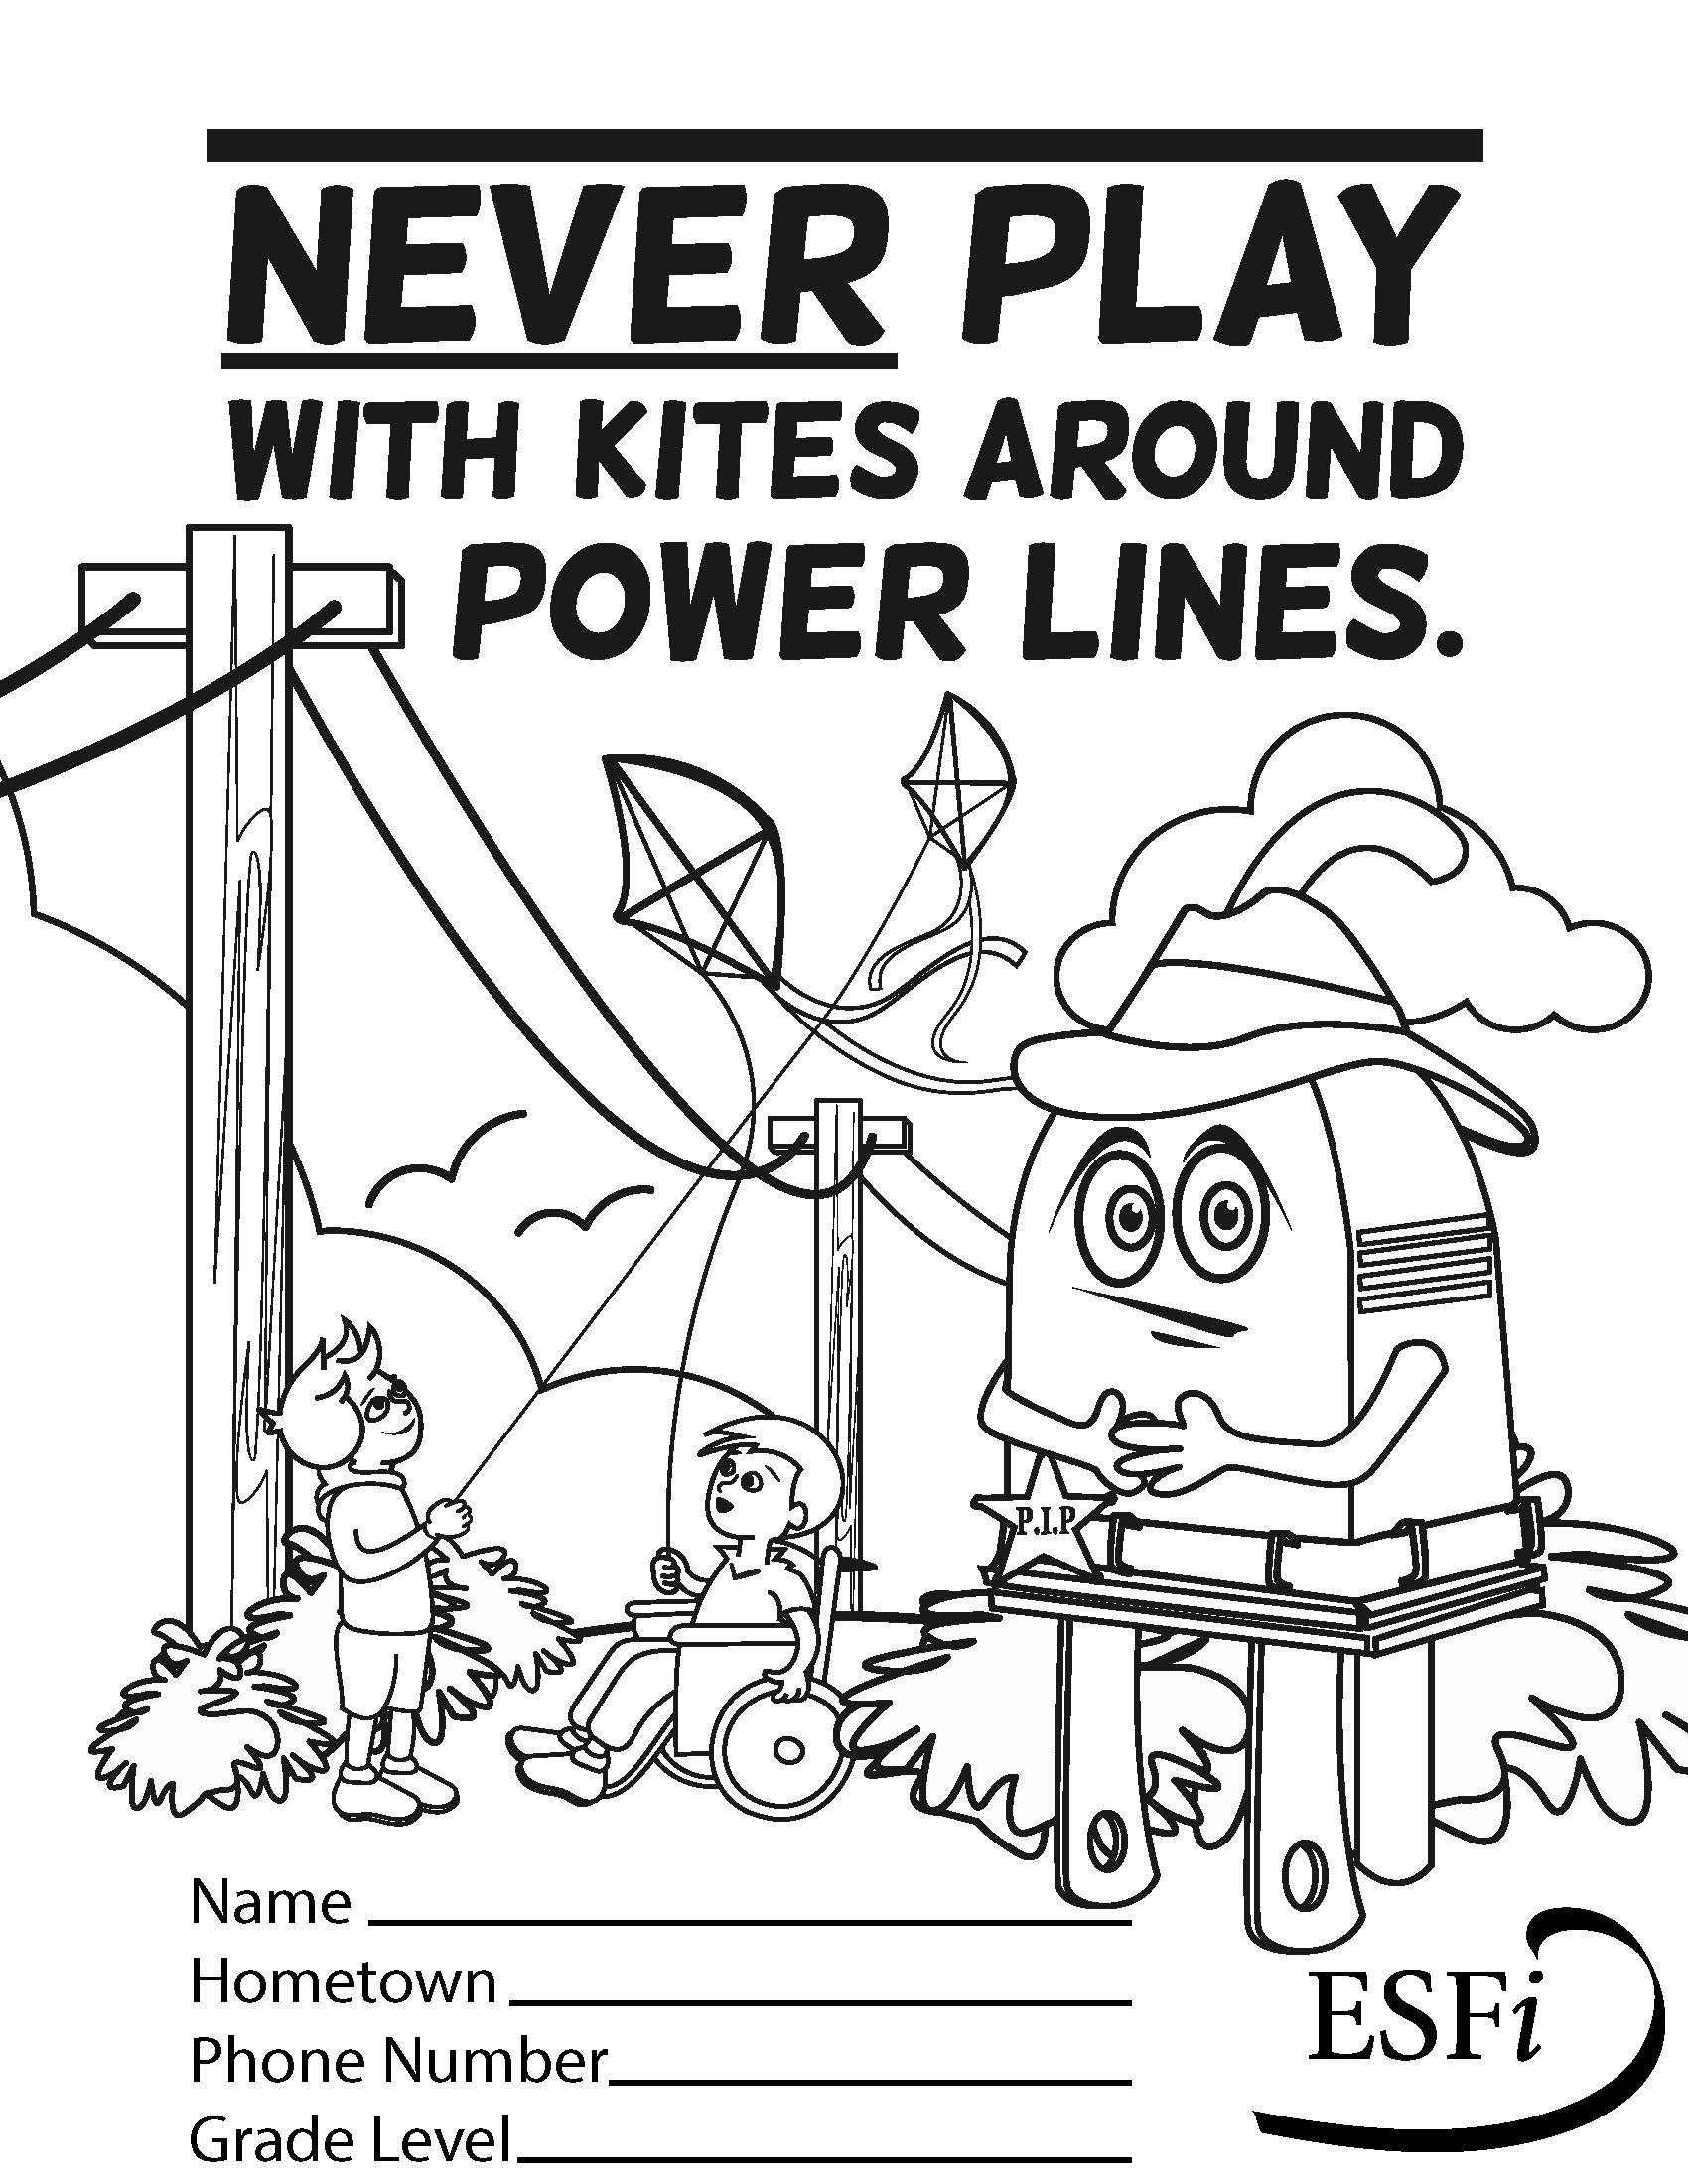 Coloring sheet with "Never Play with kites around power lines" and picture of kids flying kites.